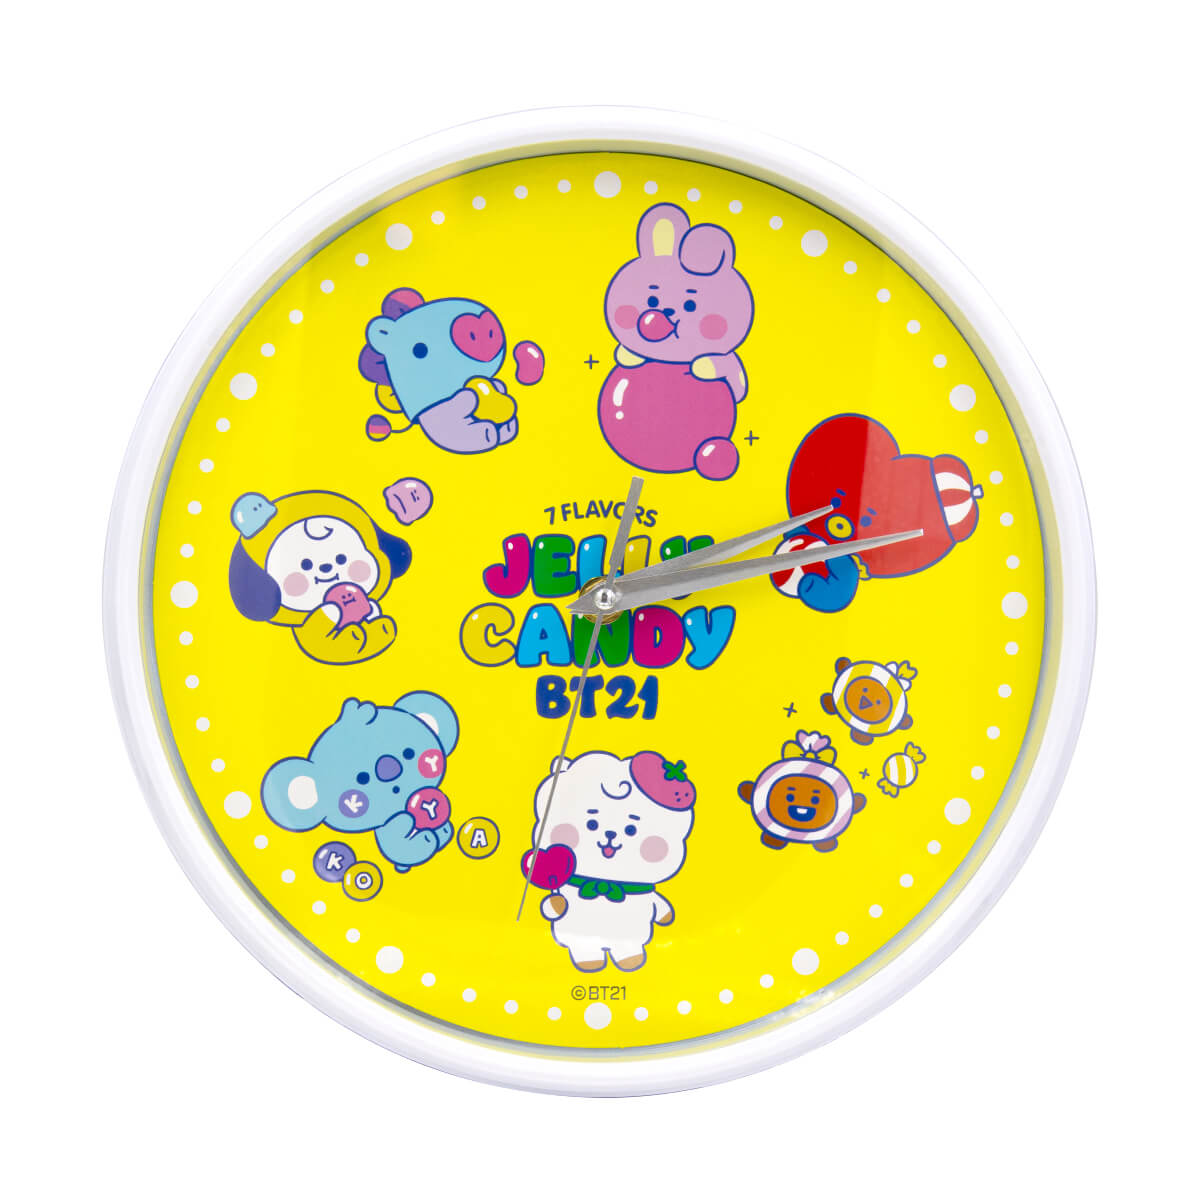 BT21 Jelly Candy Wall Clock